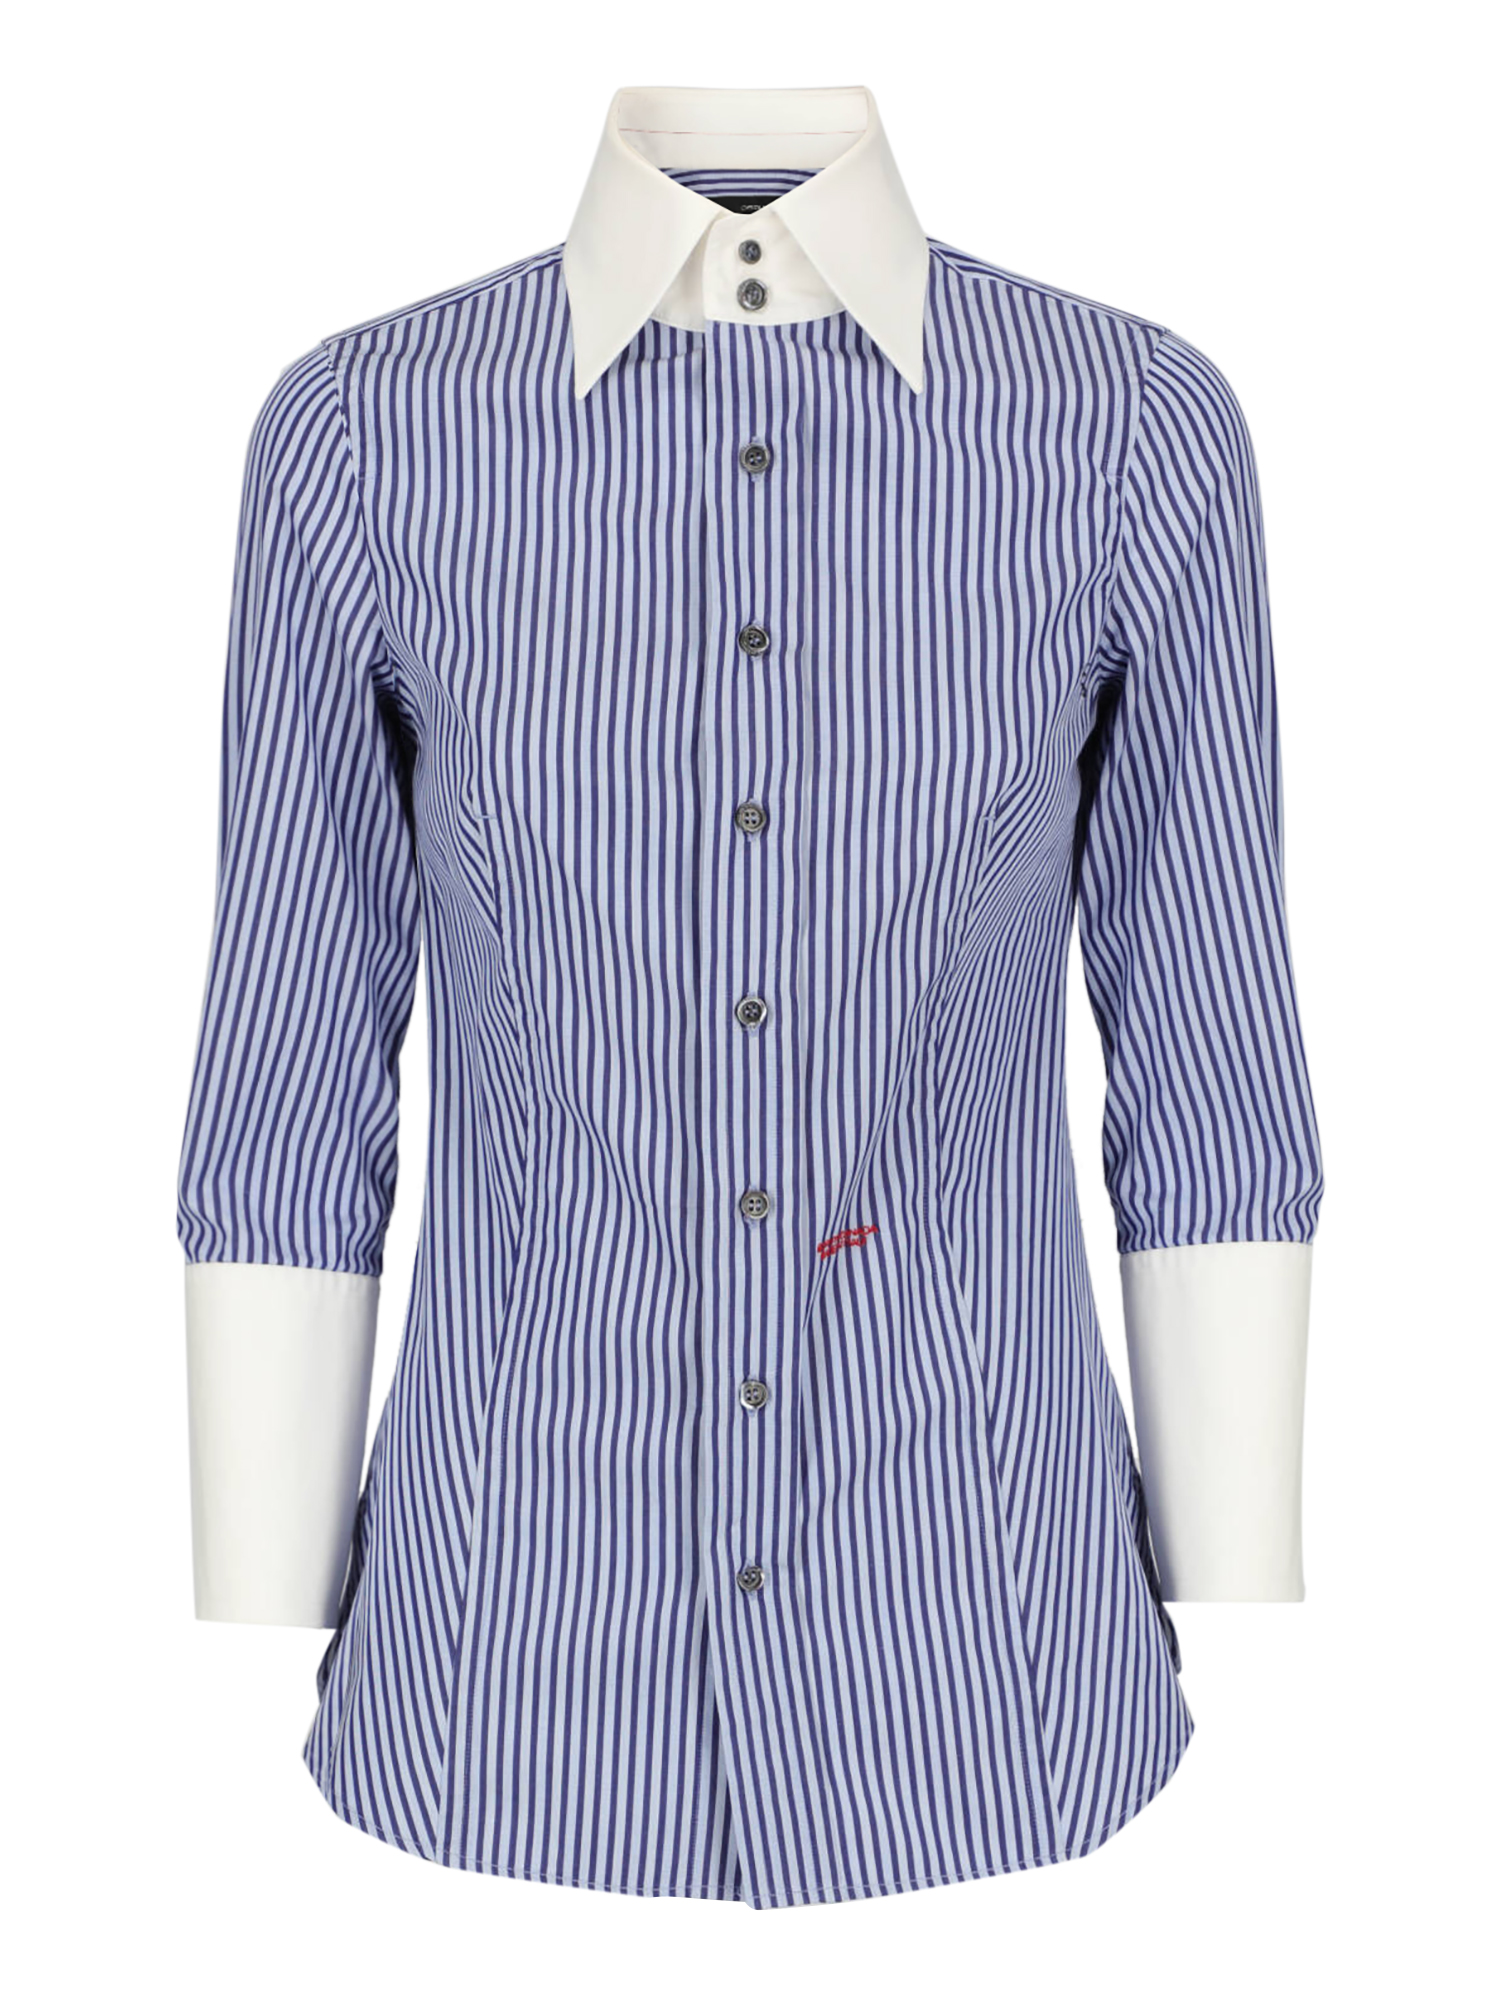 Condition: Good, Striped Cotton, Color: Blue, Navy, White - S - IT 40 -